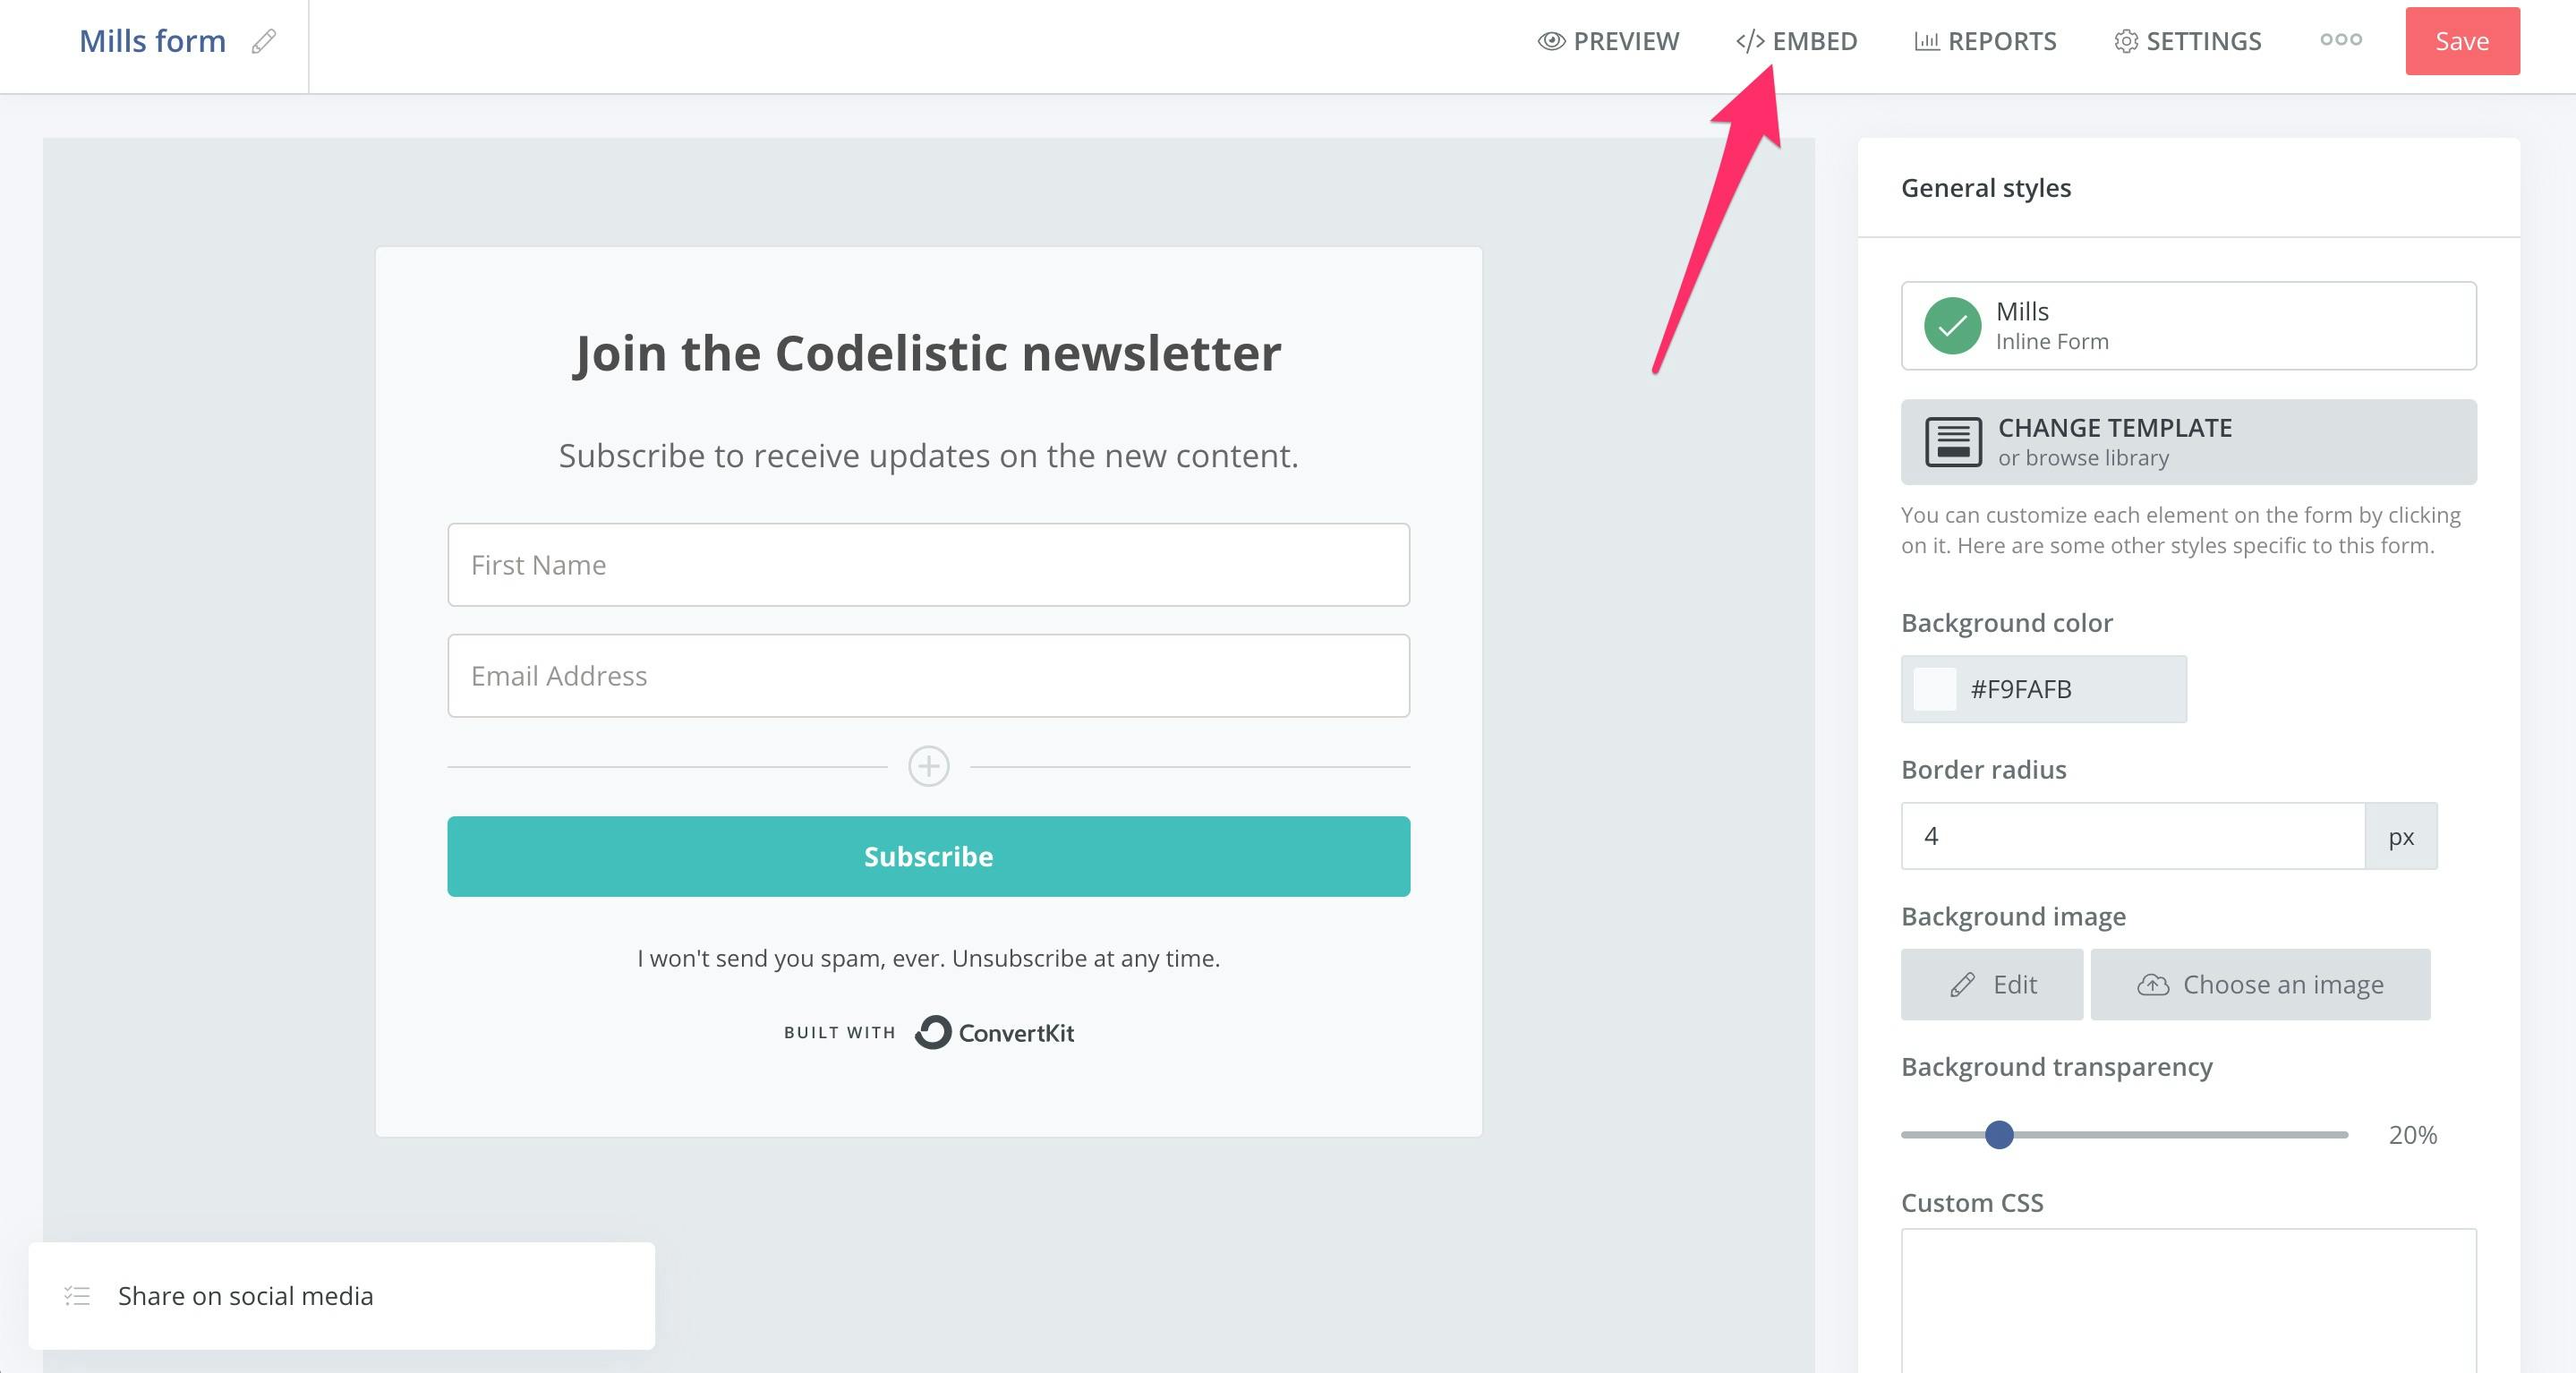 Signup form editor in ConvertKit showing the Embed button on top